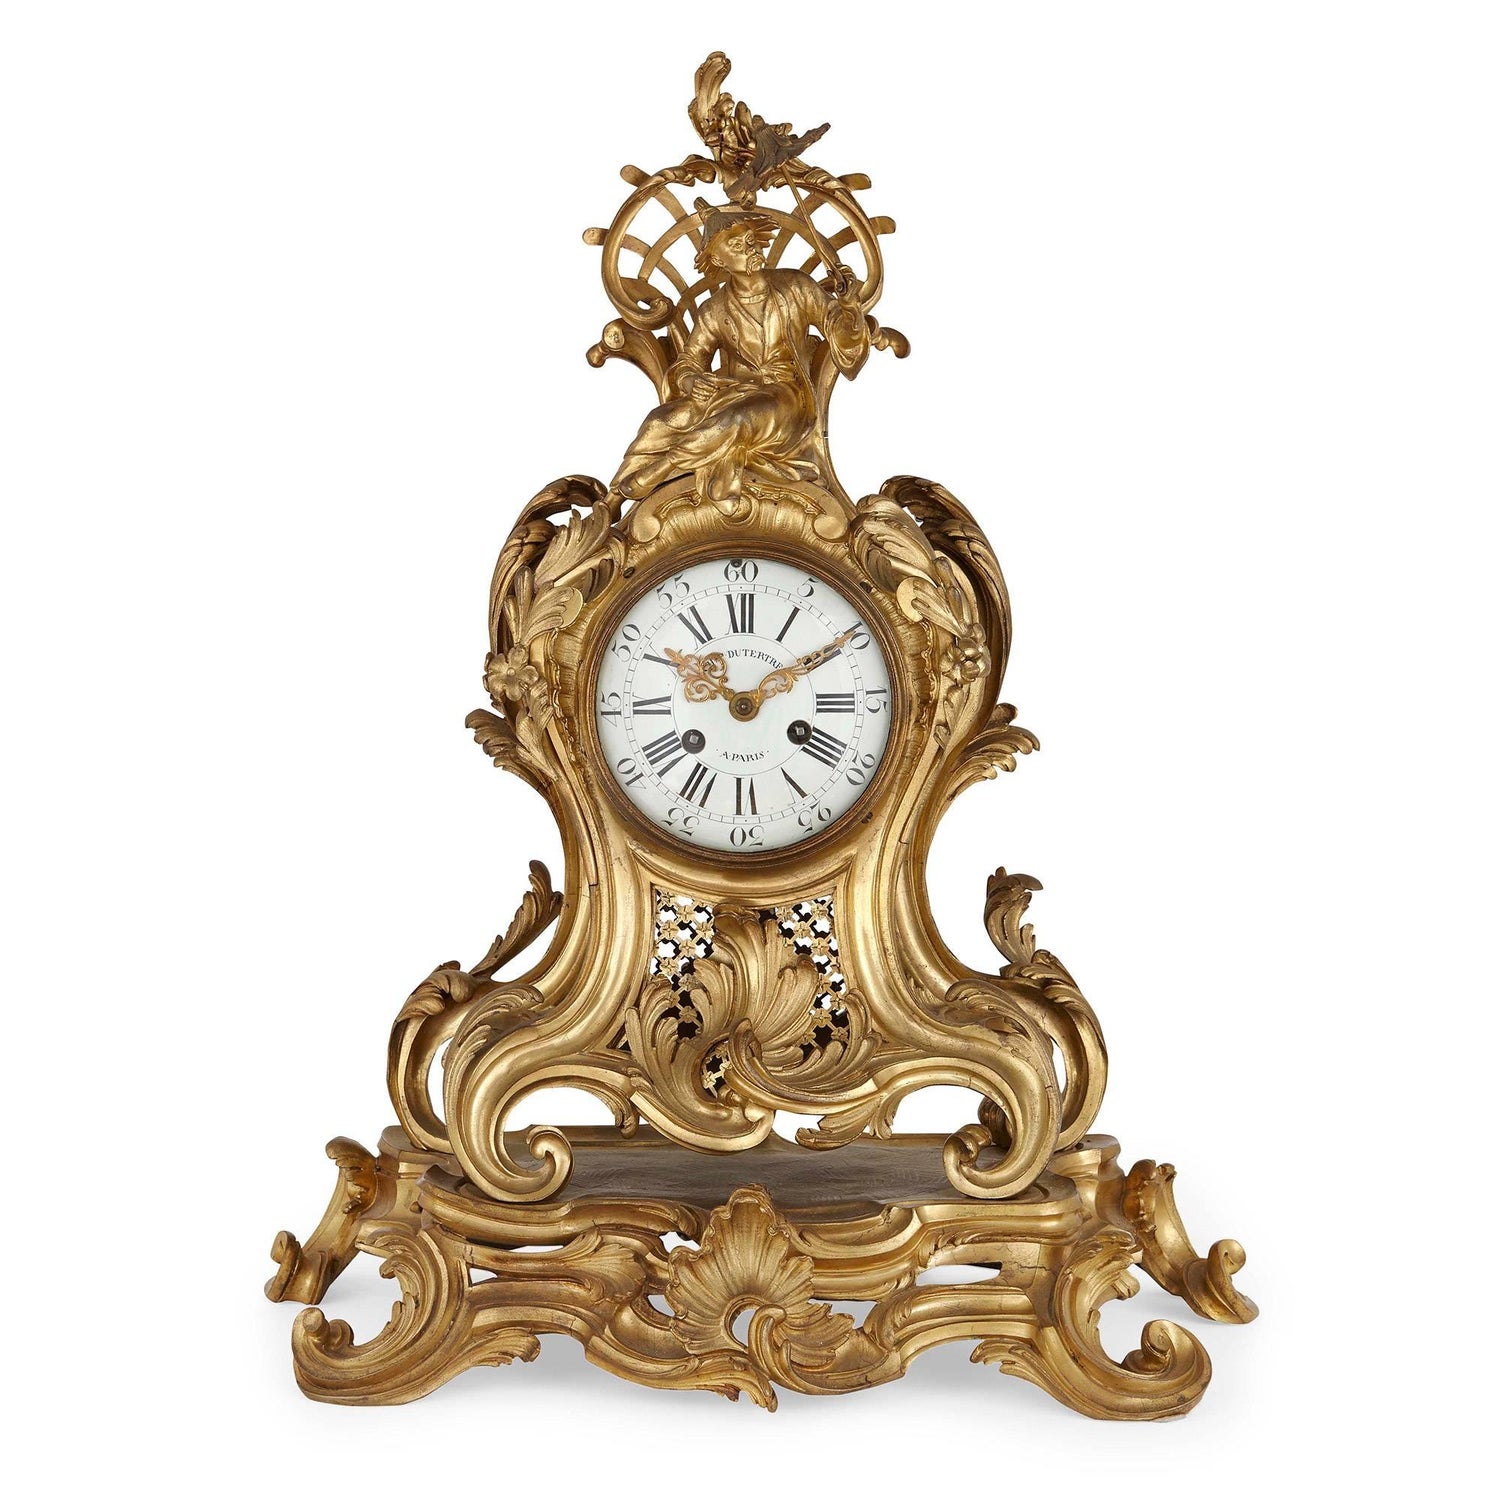 Louis Xv Ormolu Mantel Clock By Charles Du Tertre In The Chinoiserie Style For Sale At 1stdibs The mercury is driven off in a kiln leaving behind a gold coating. louis xv ormolu mantel clock by charles du tertre in the chinoiserie style